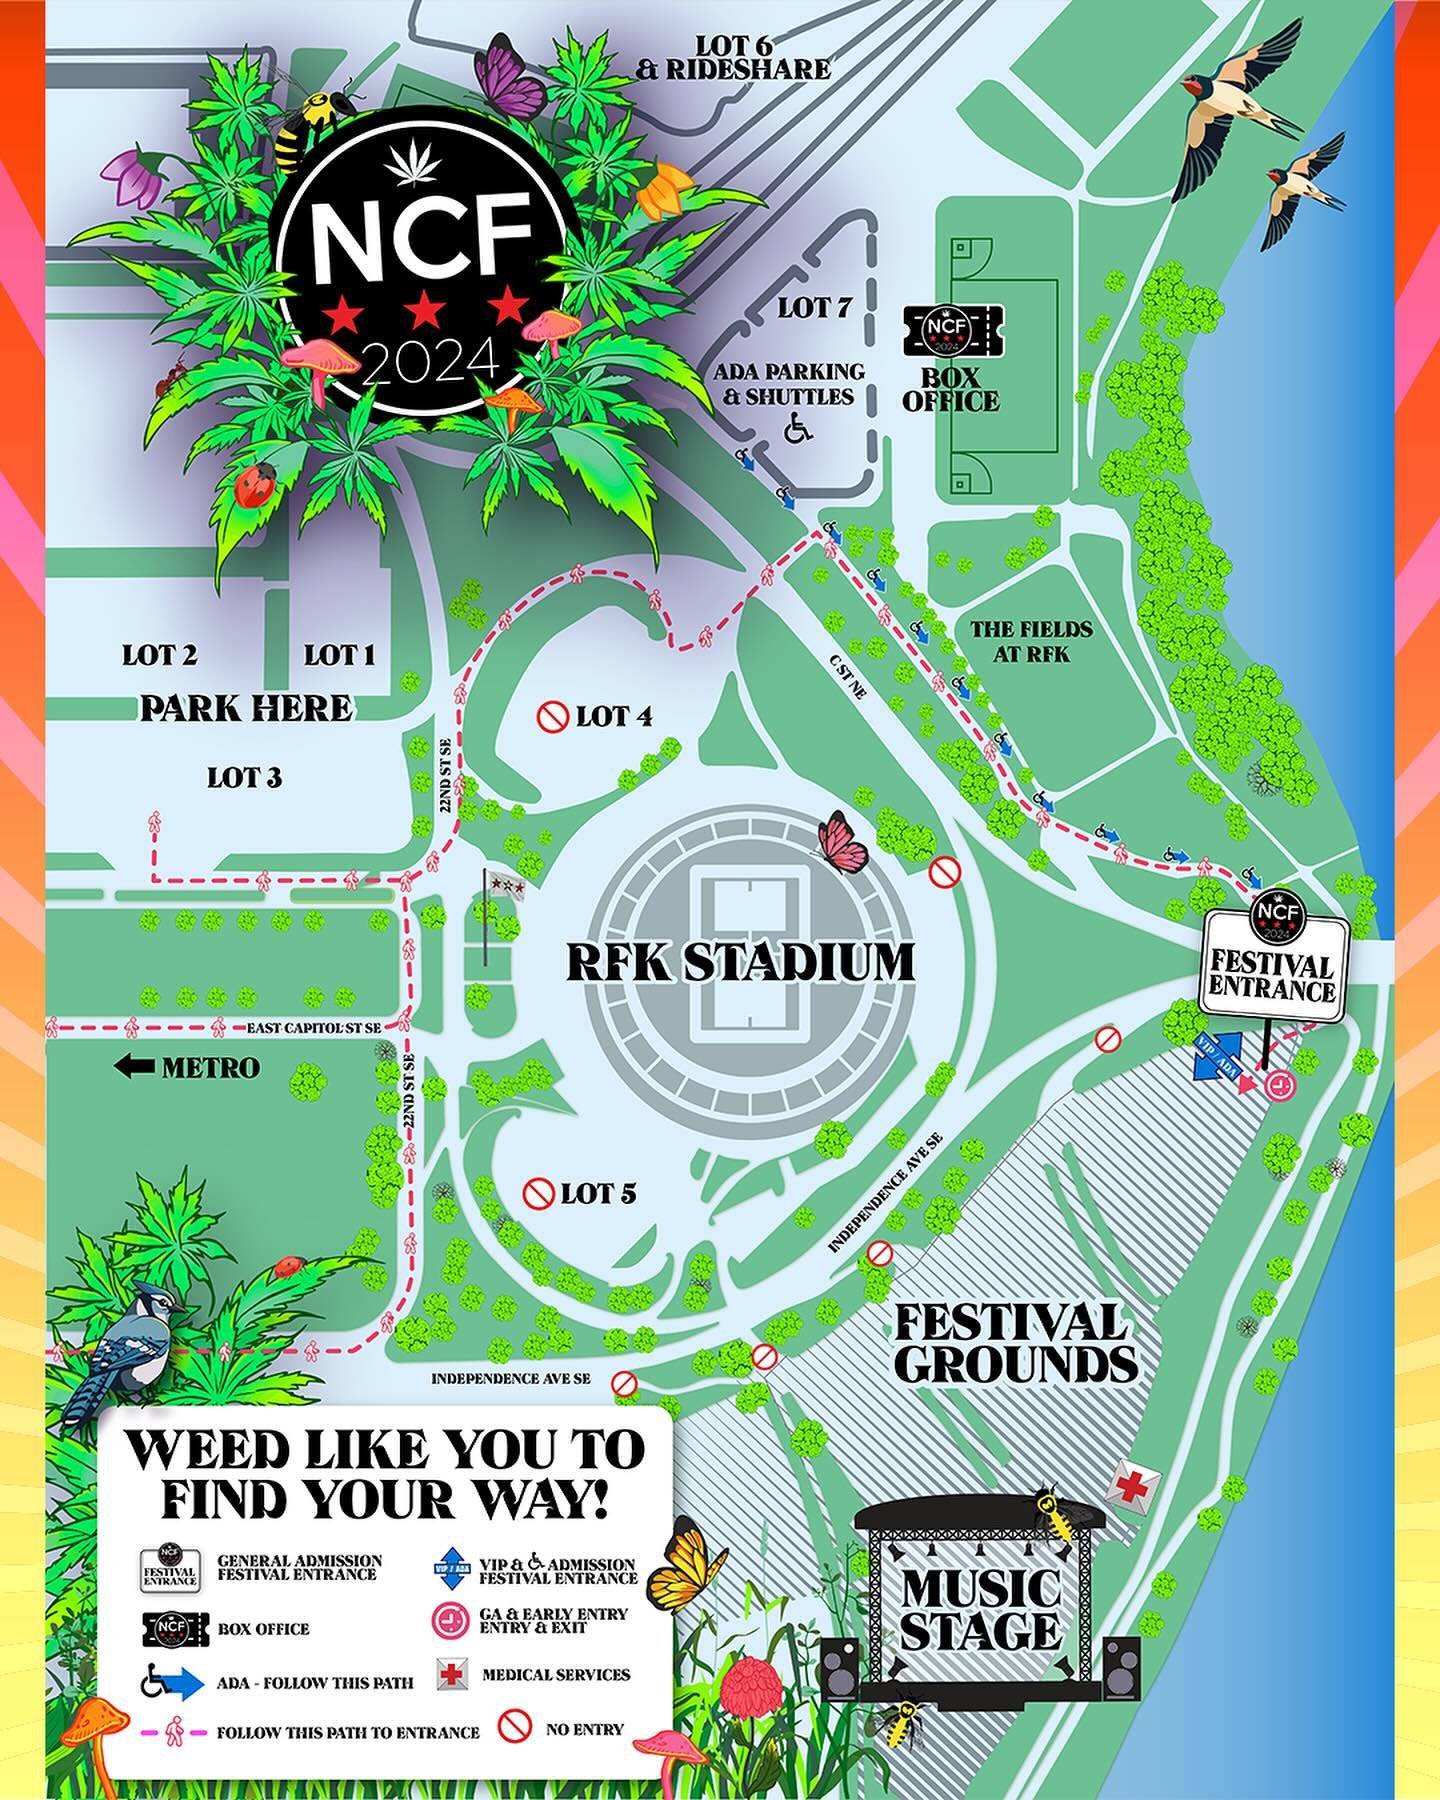 Save our NCF 2024 maps! 🗺️ Plan your trip: SWIPE for Exhibitor Fair details, Festival Experience locations, Main Stage music, Munchies Zone and more.